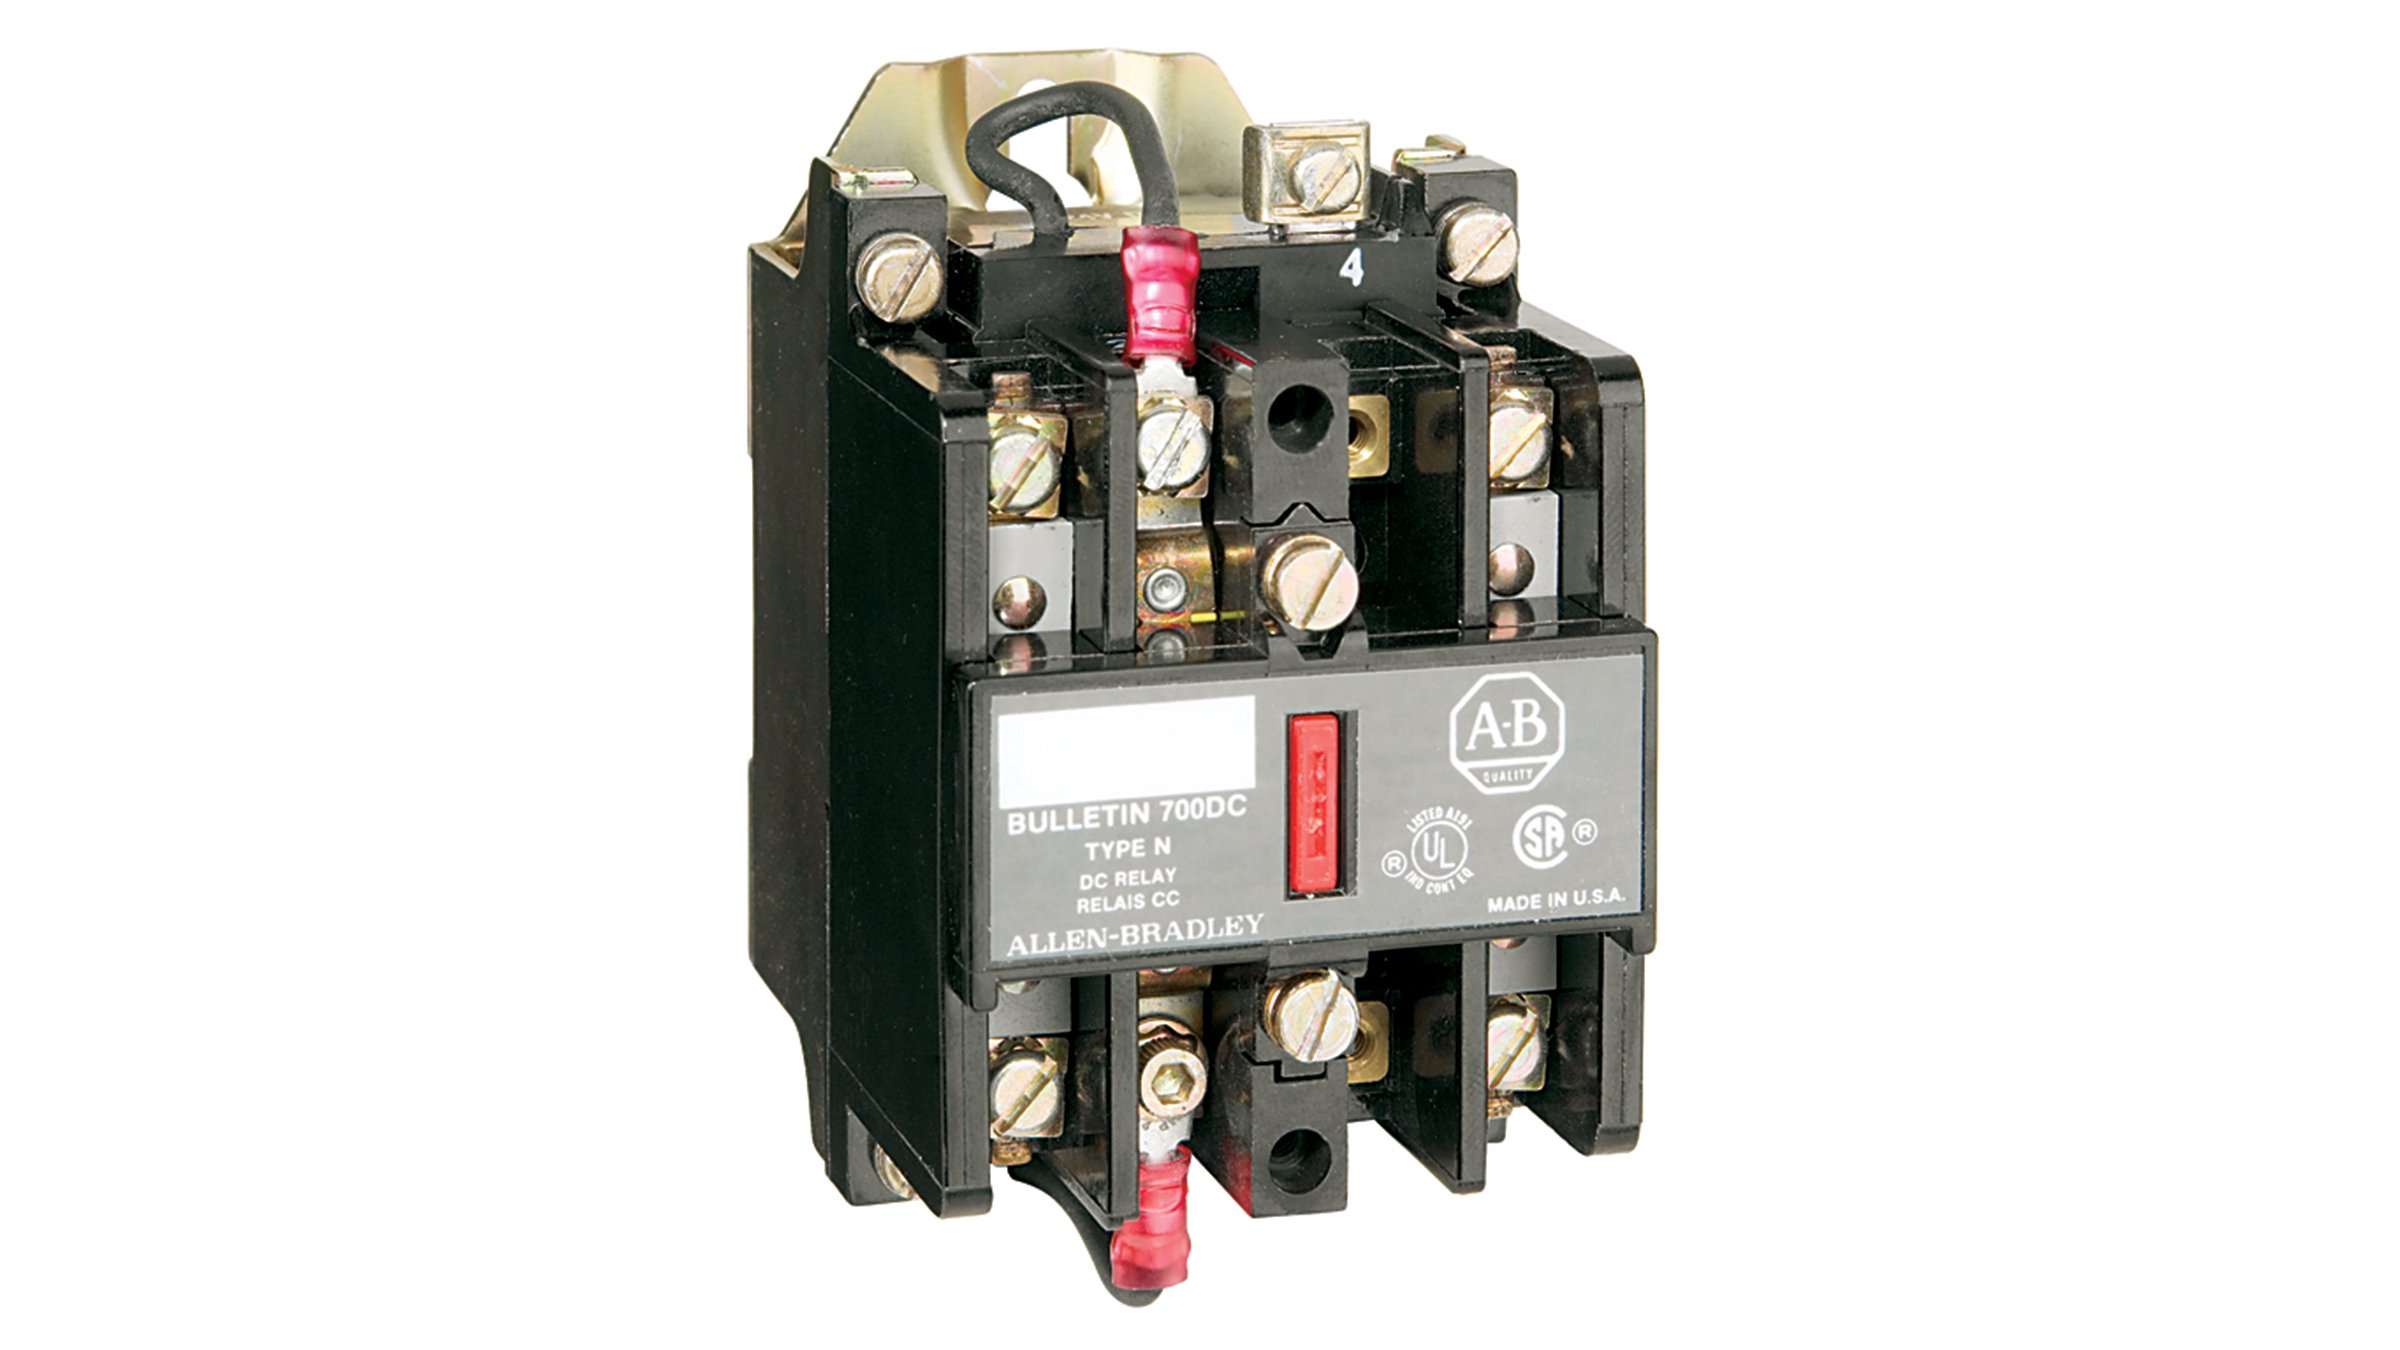 Allen-Bradley Bulletin 700-N Industrial Relays are a low profile, high reliability switching solution.